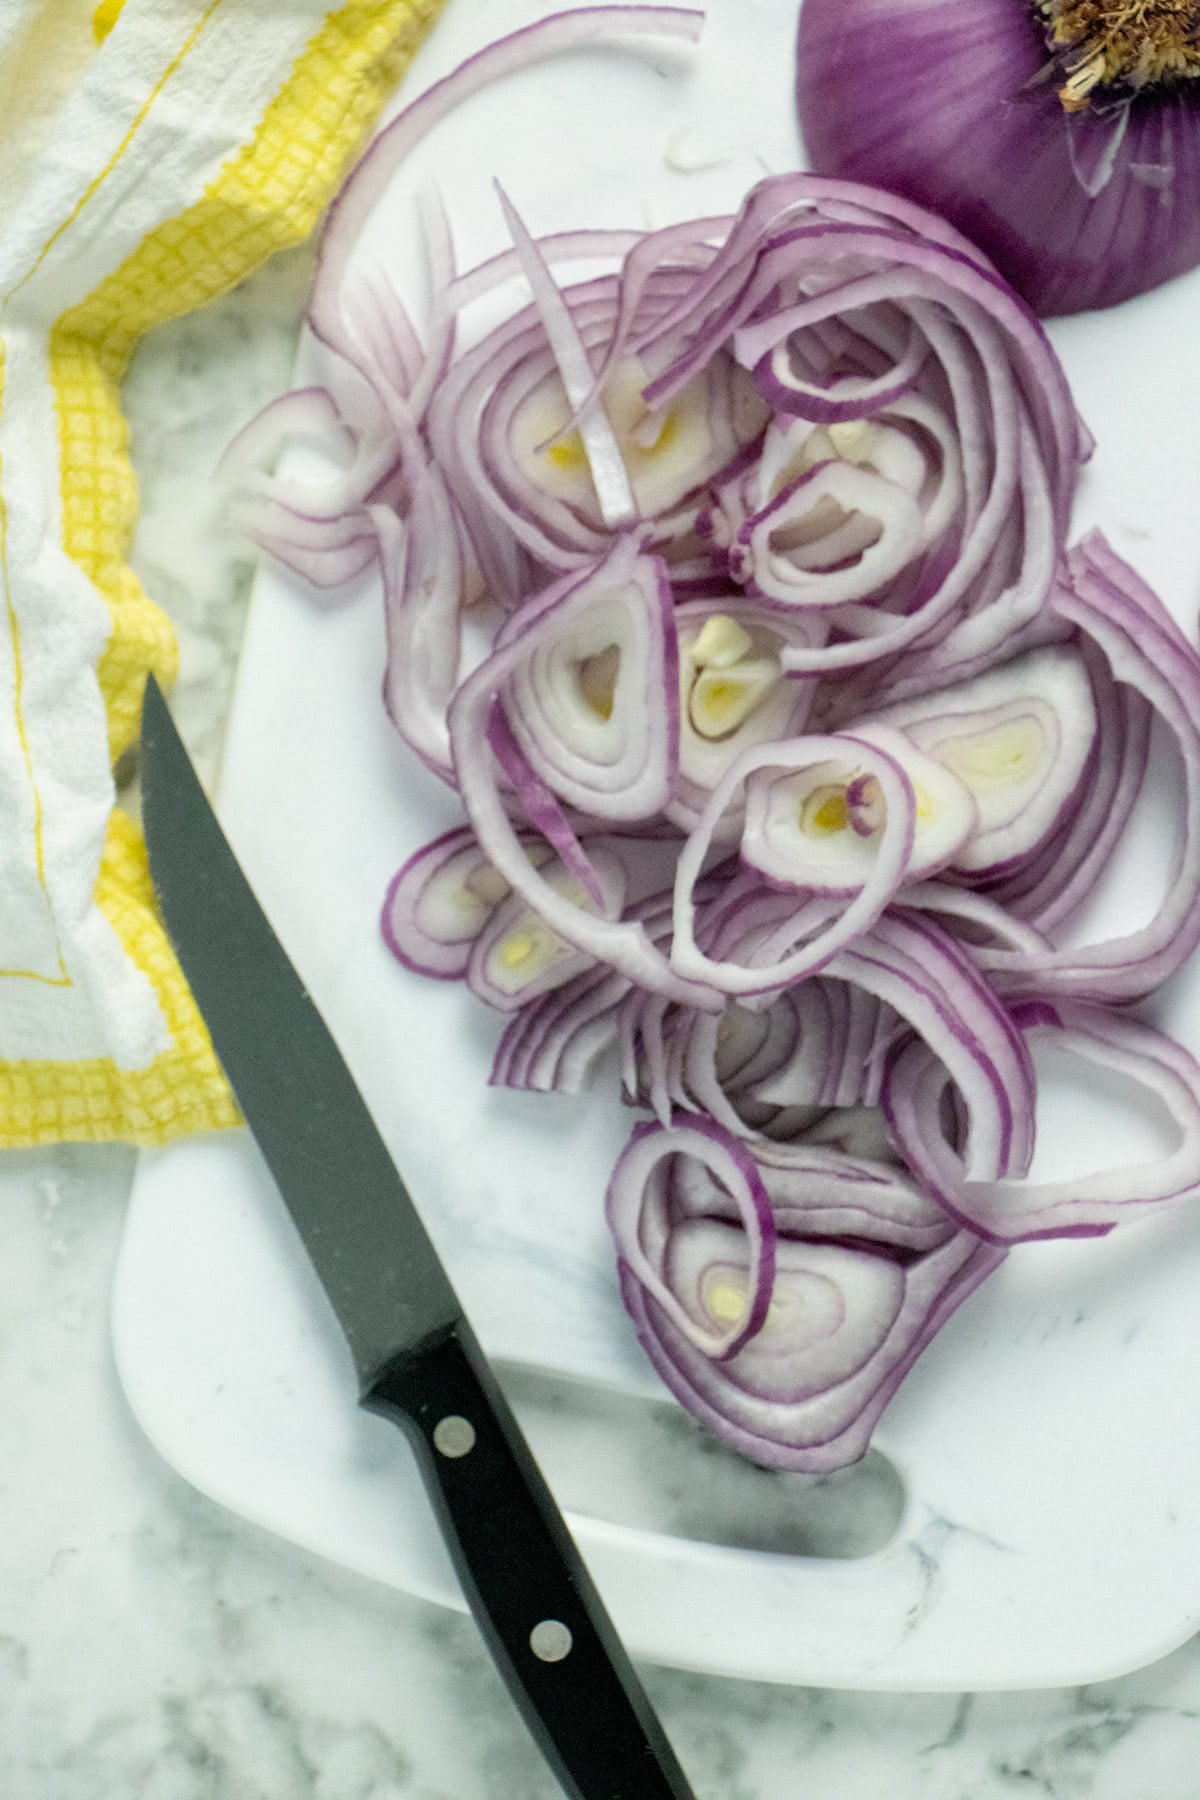 sliced red onions on a cutting board next to a knife